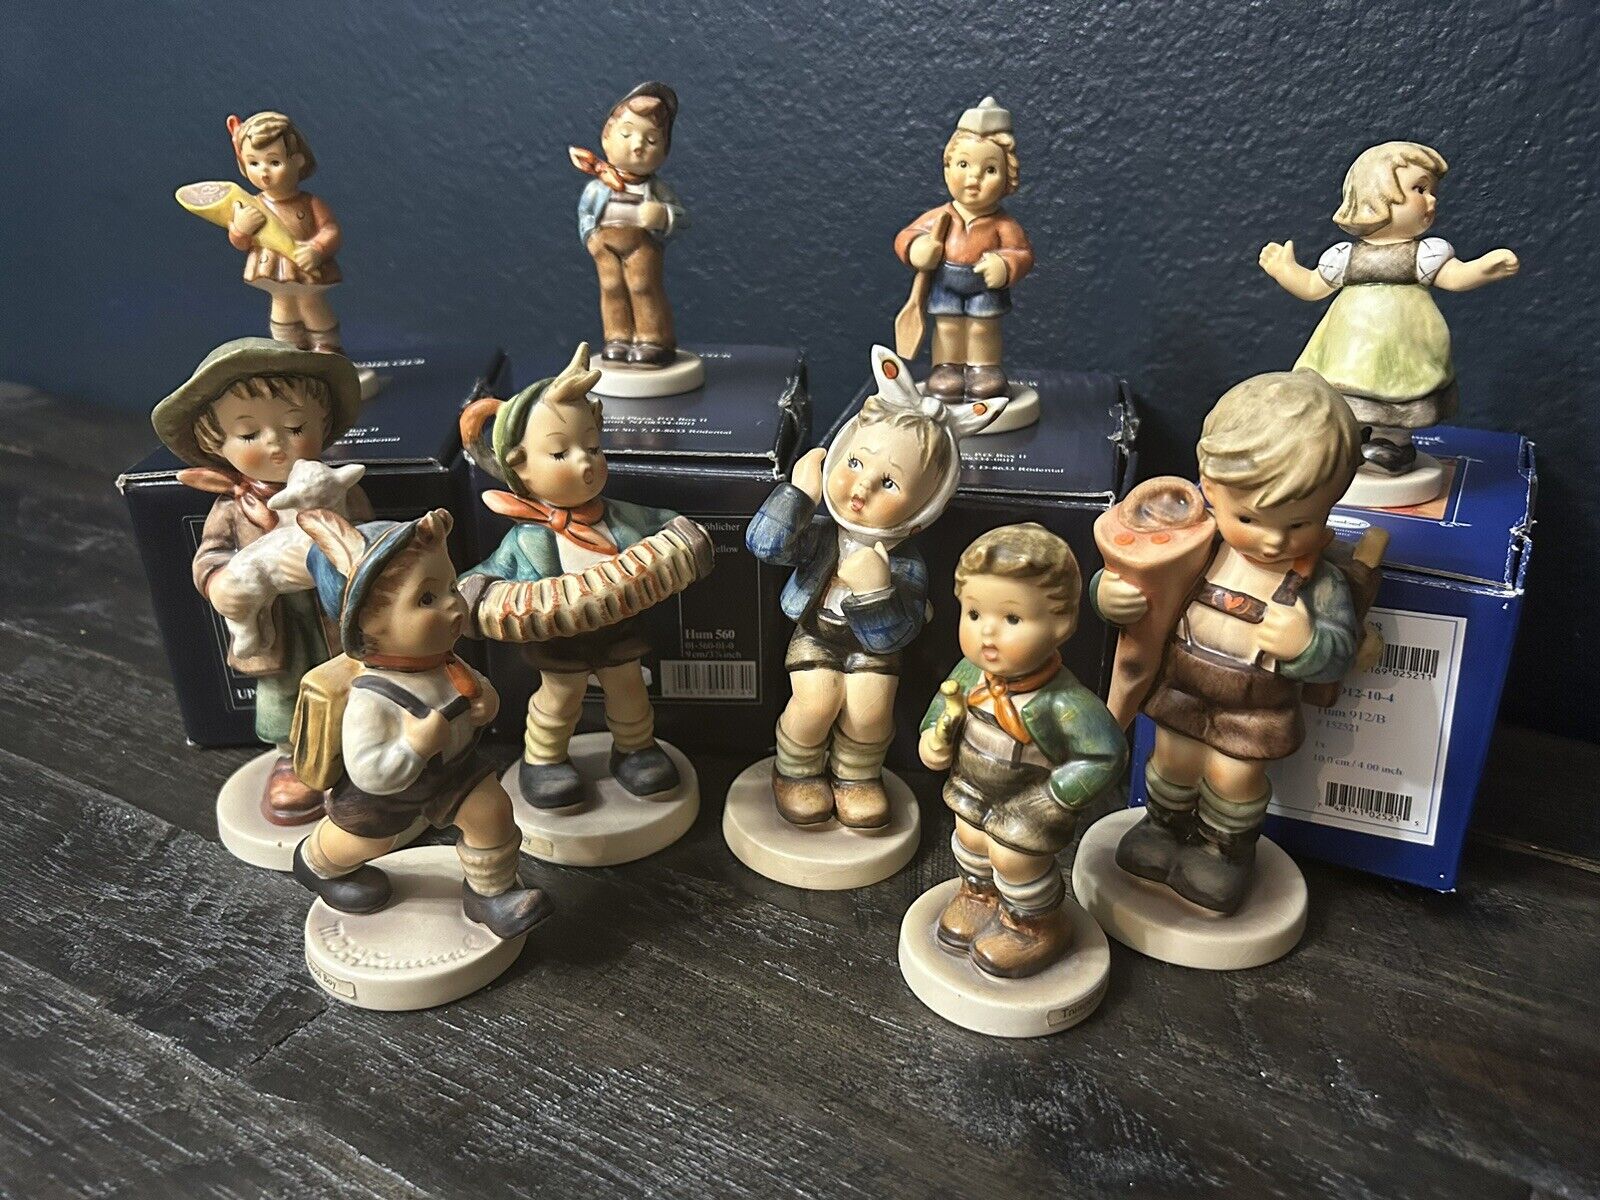 Vintage Hummel Goebel W. Germany Lot of 10 Figurines in Great Condition 4 boxes